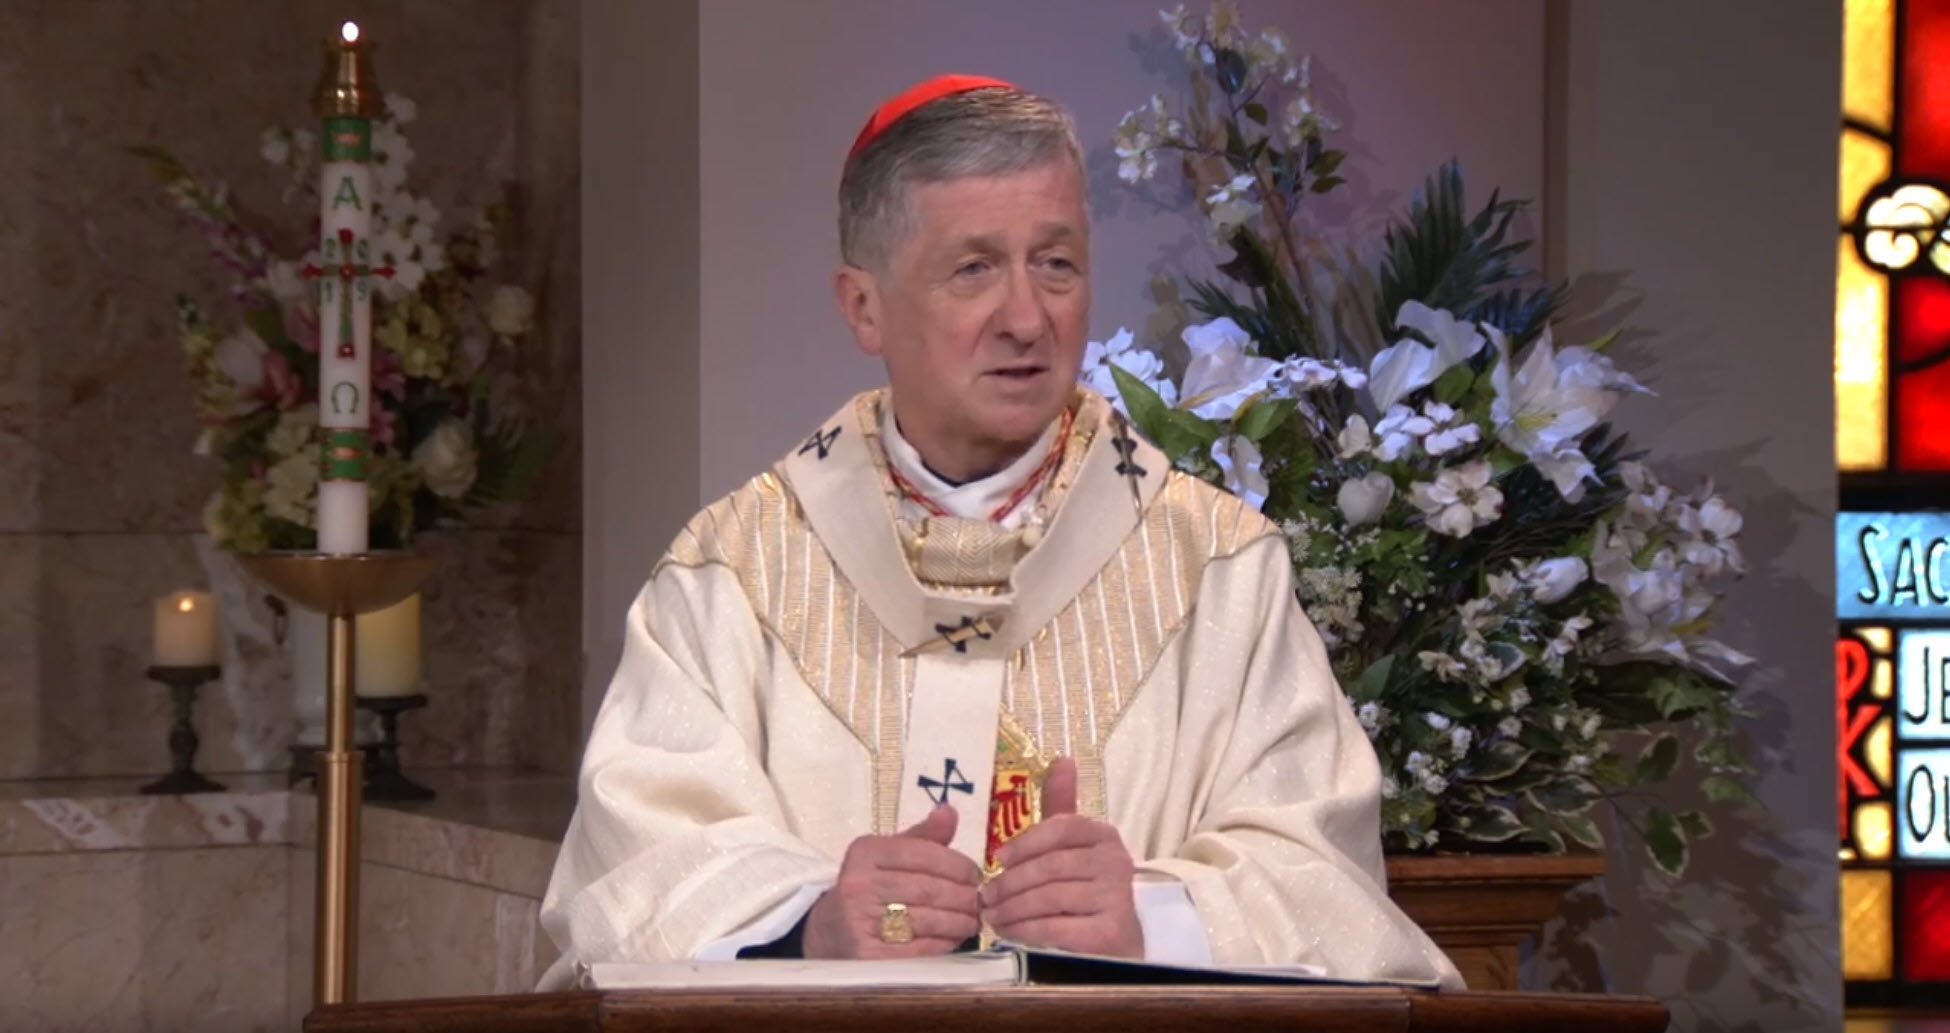 Cardinal Blase Cupich celebrates on Easter Sunday of the Resurrection of the Lord